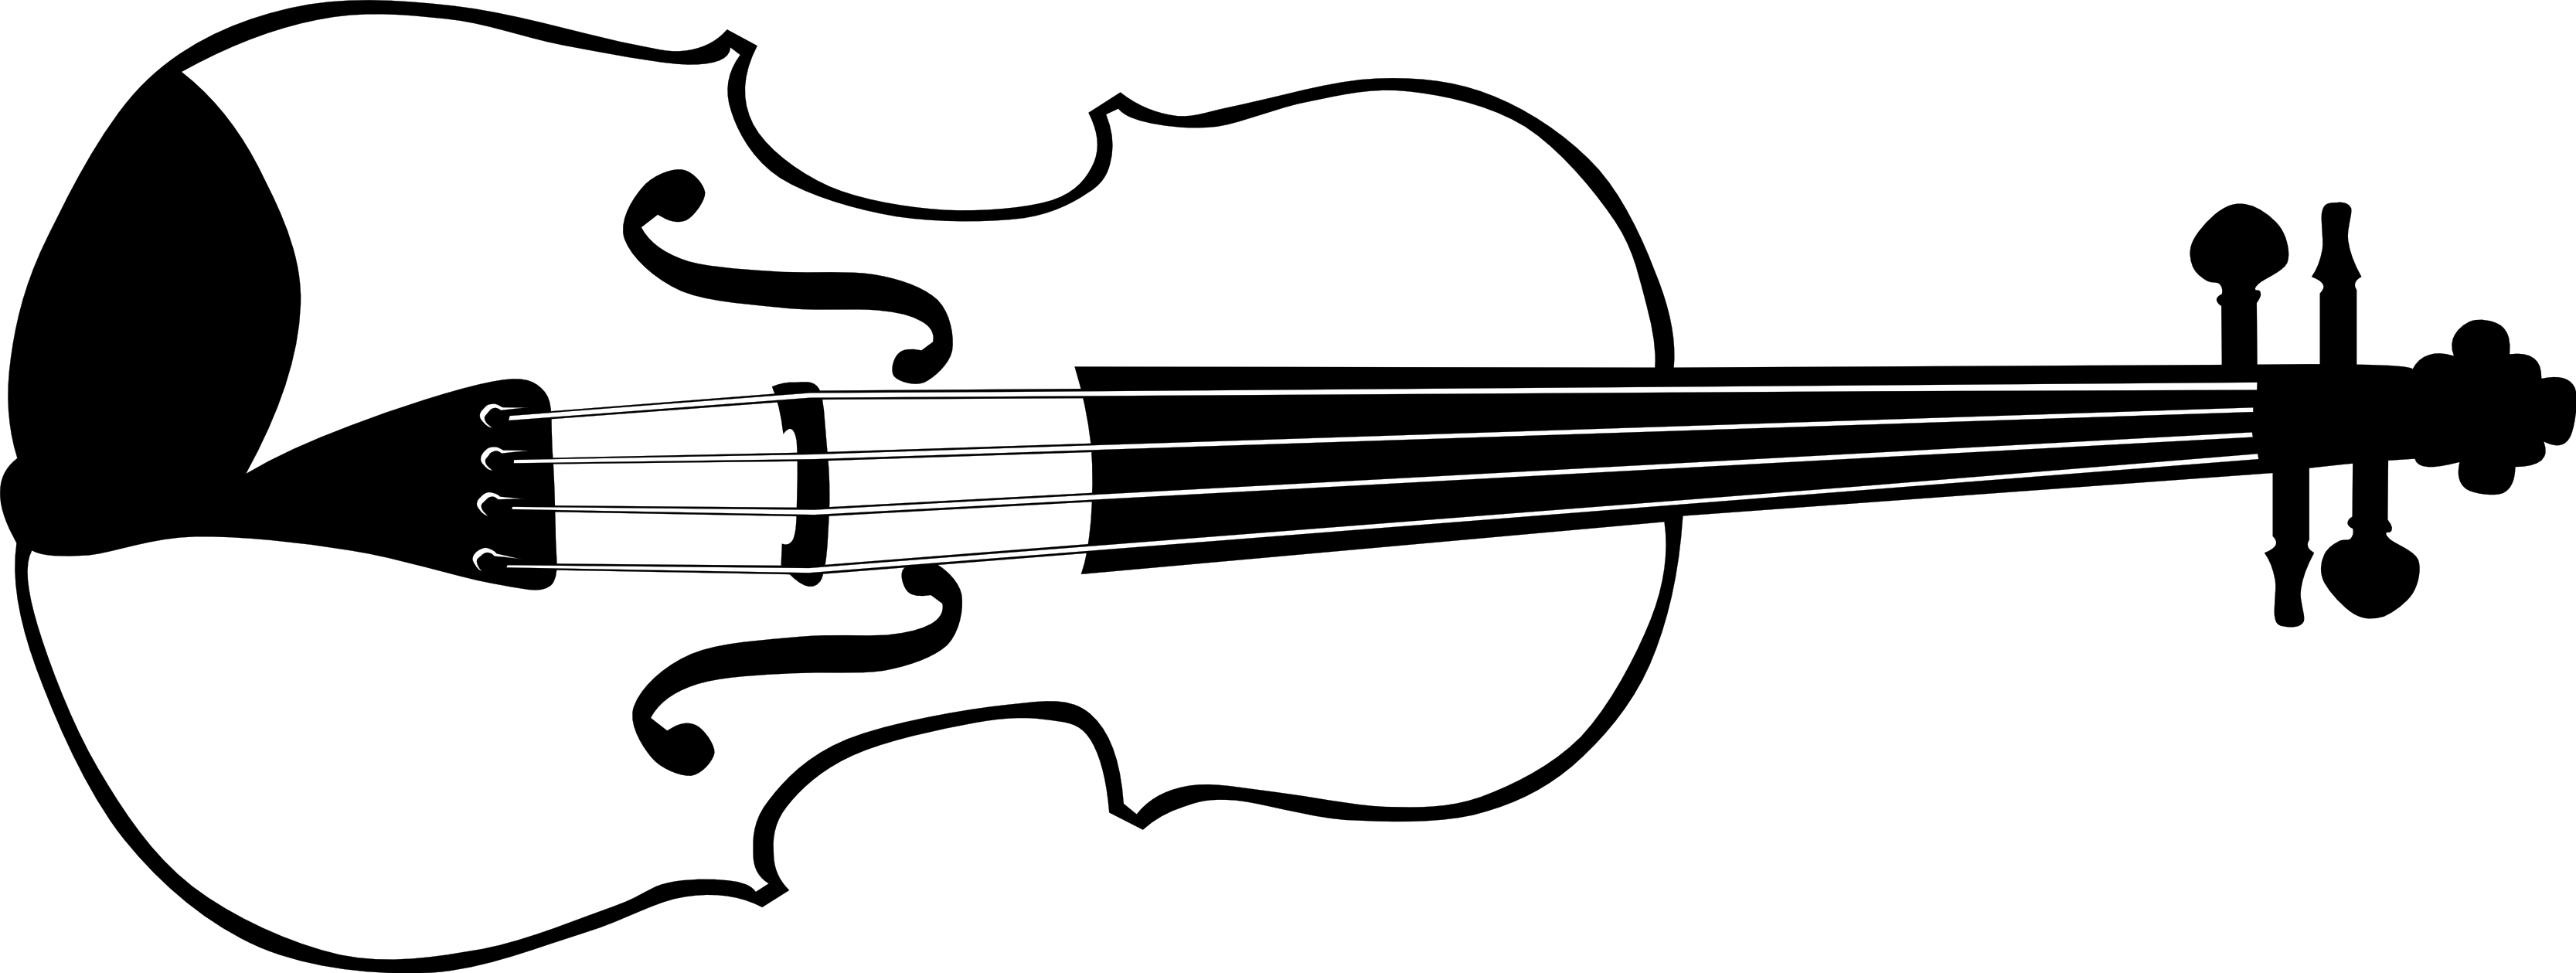 Violin Clipart Black And White   Clipart Panda   Free Clipart Images